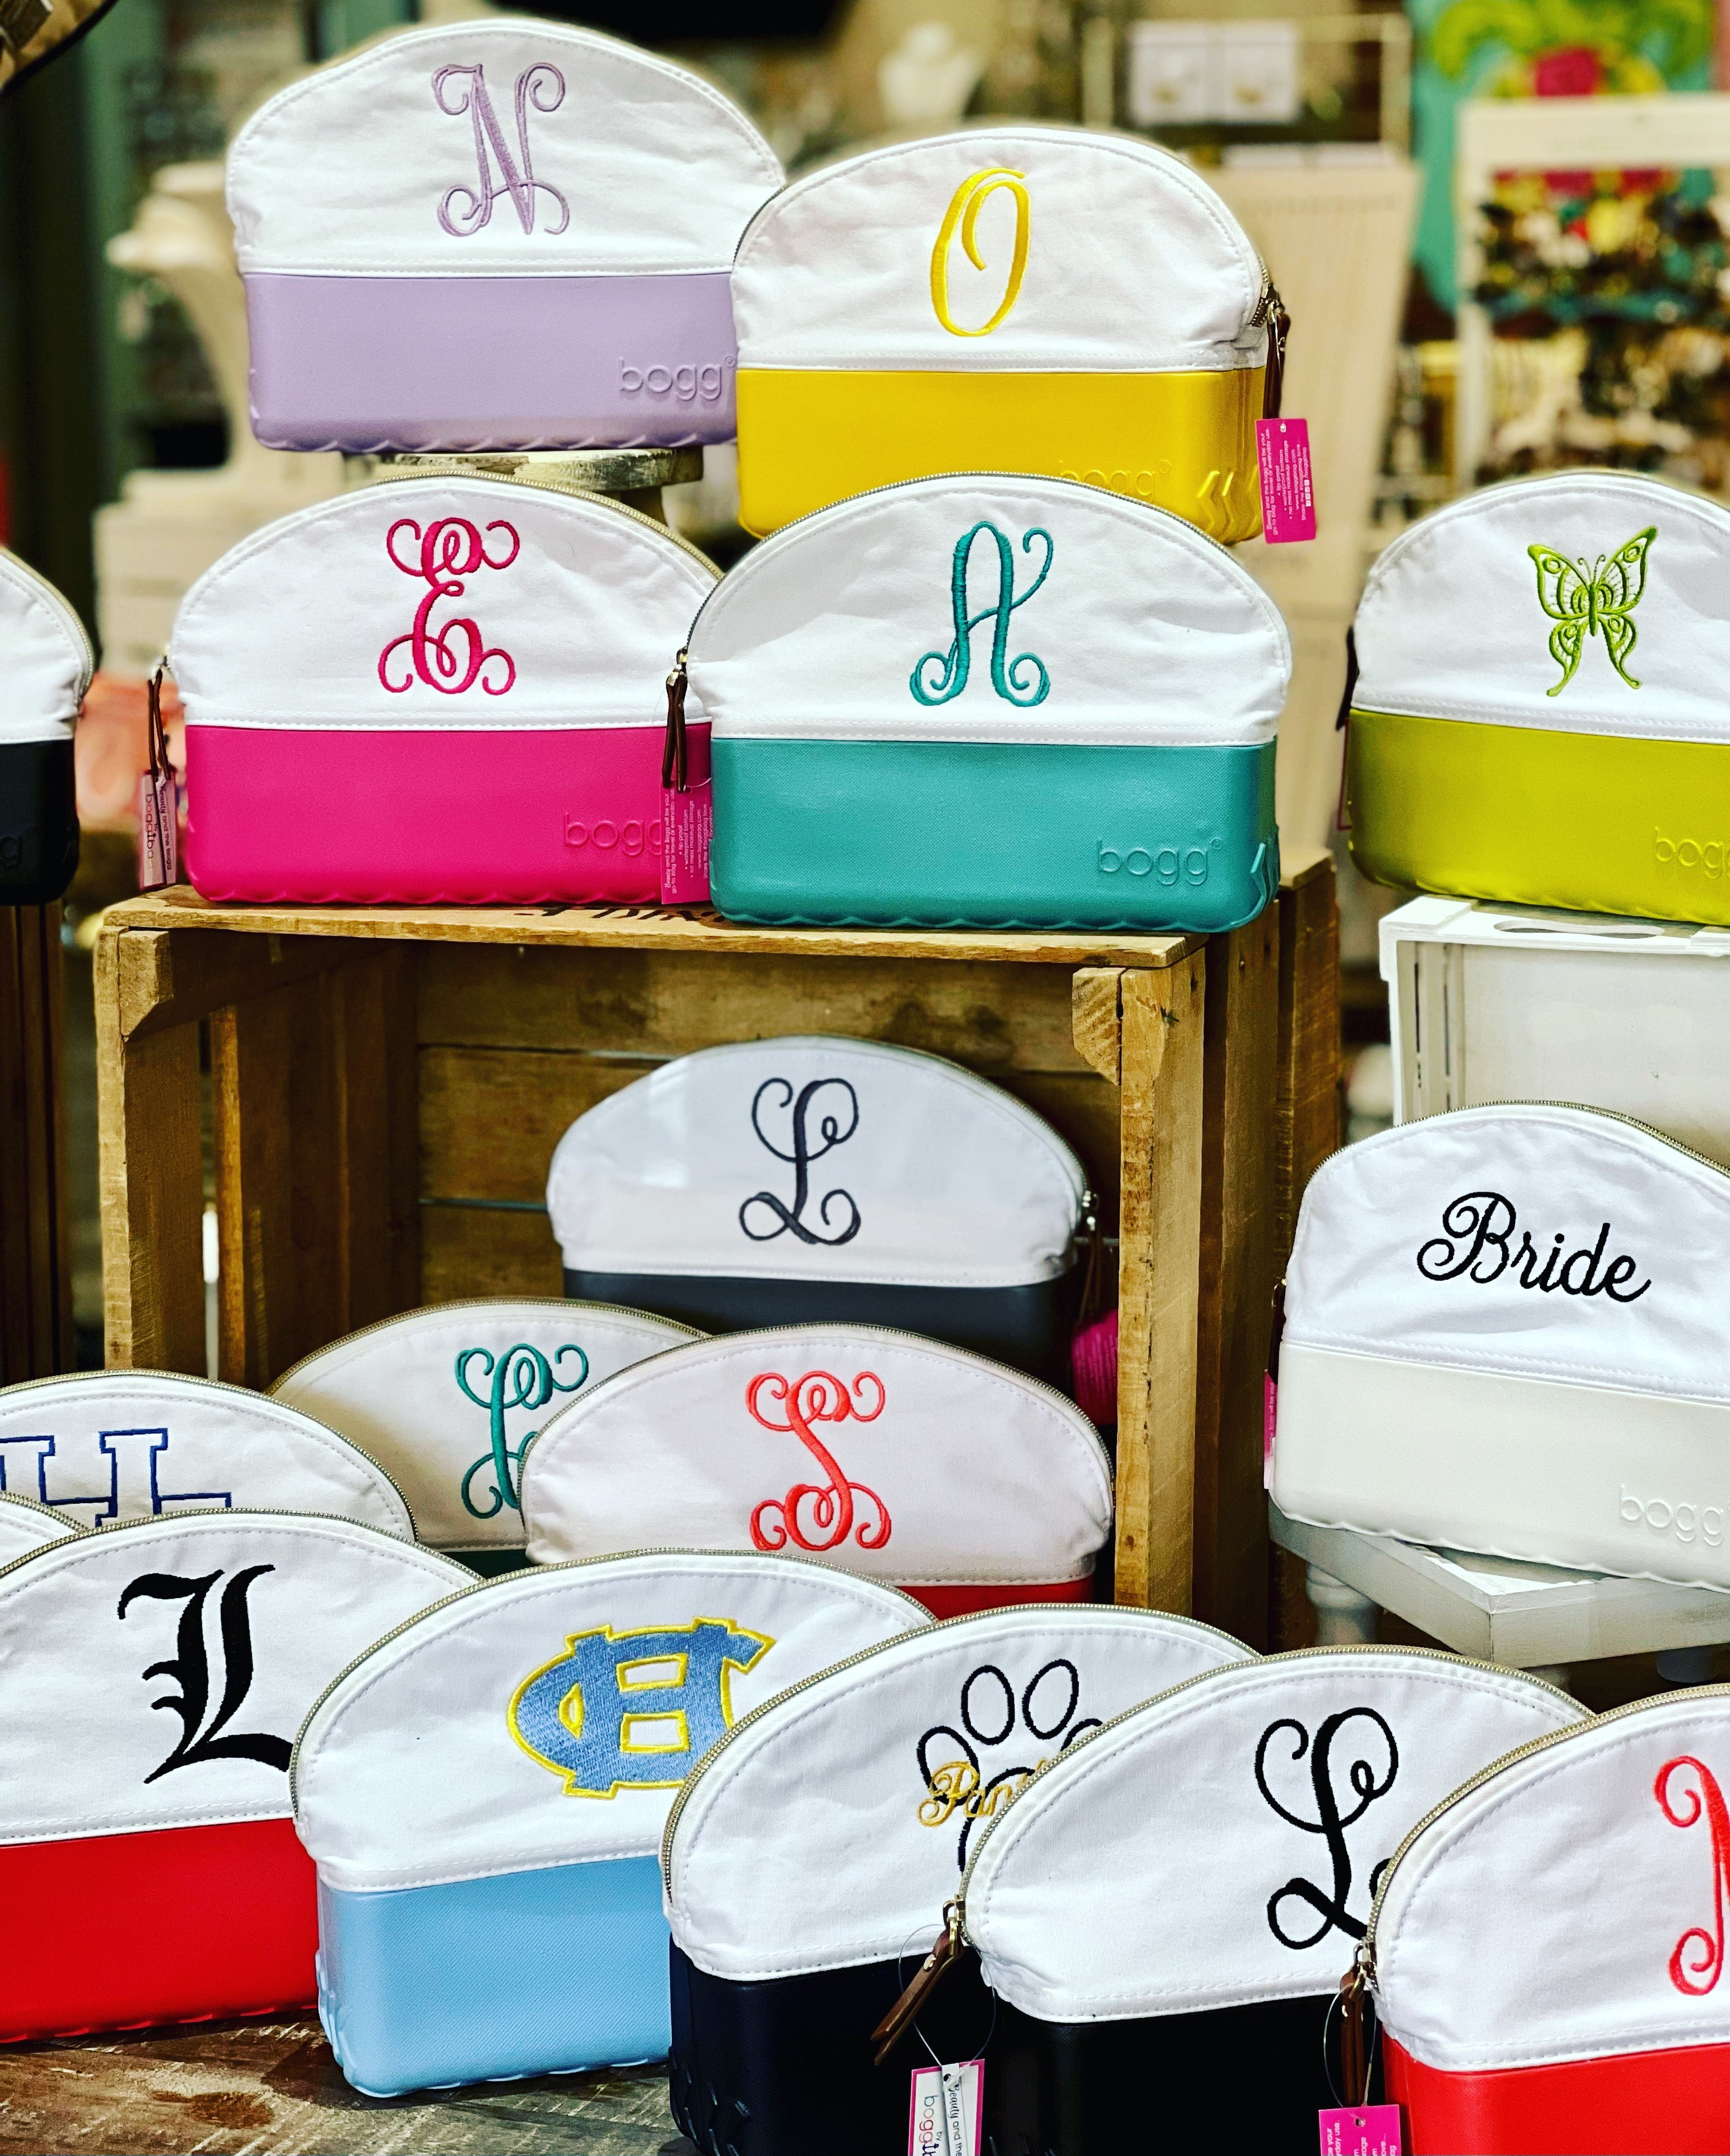 Bogg Bag - Monogrammed Beauty and the Bogg Cosmetic cases make eggcellent  gifts for Easter 🐣 @roots_southern